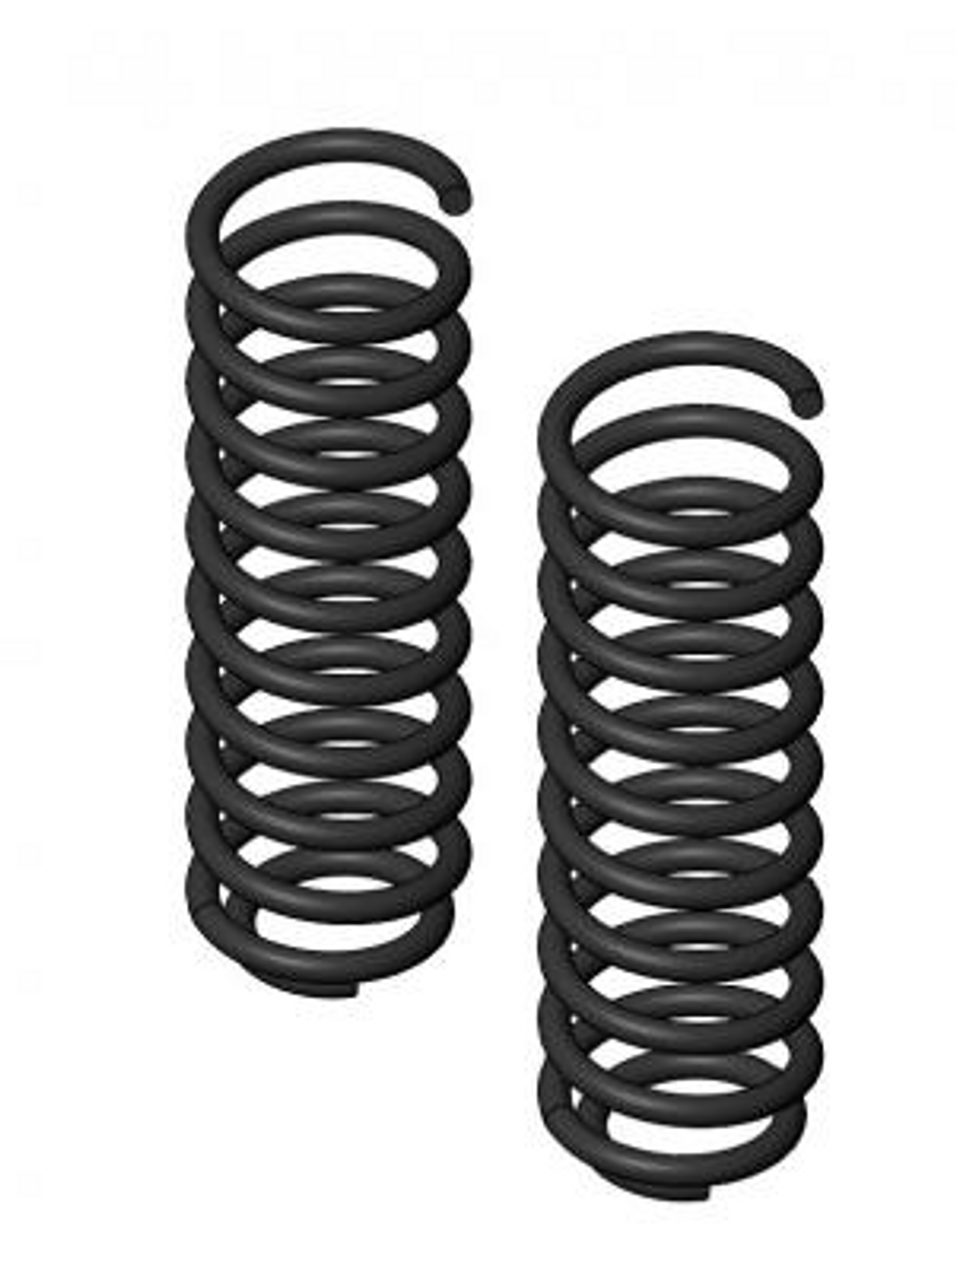 Clayton Off Road 1508351 3.5" Rear Coil Spring Pair for Jeep Wrangler JK 2007-2018